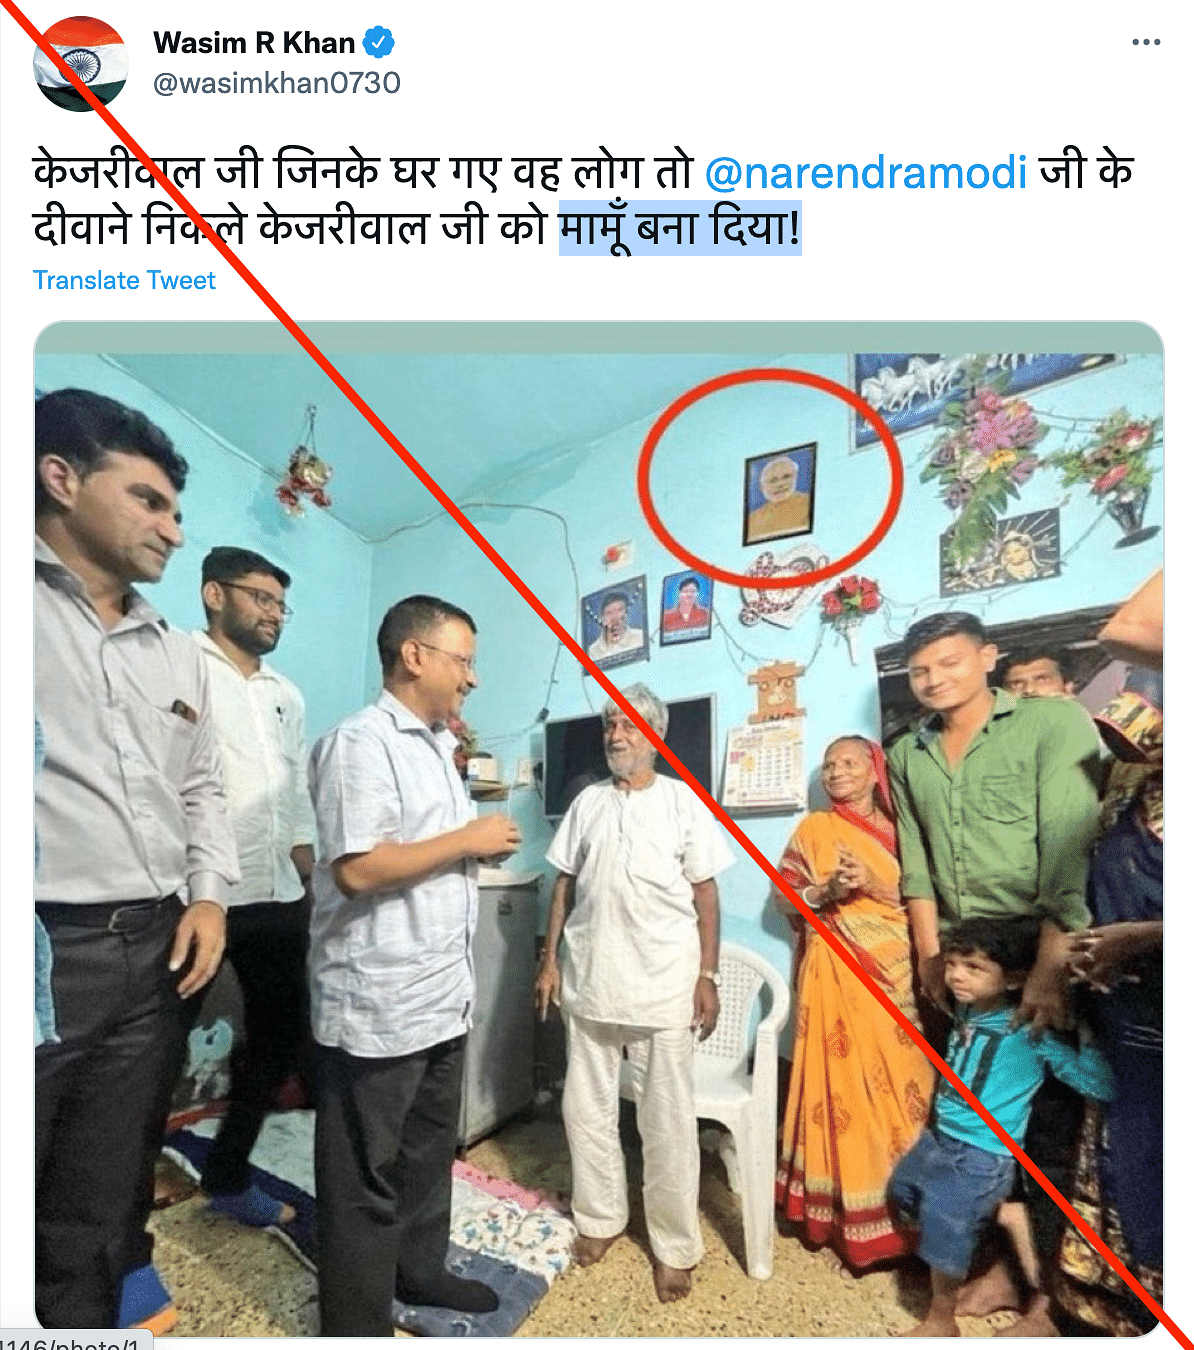 The viral photo has been doctored to add a photo of PM Modi in the background.